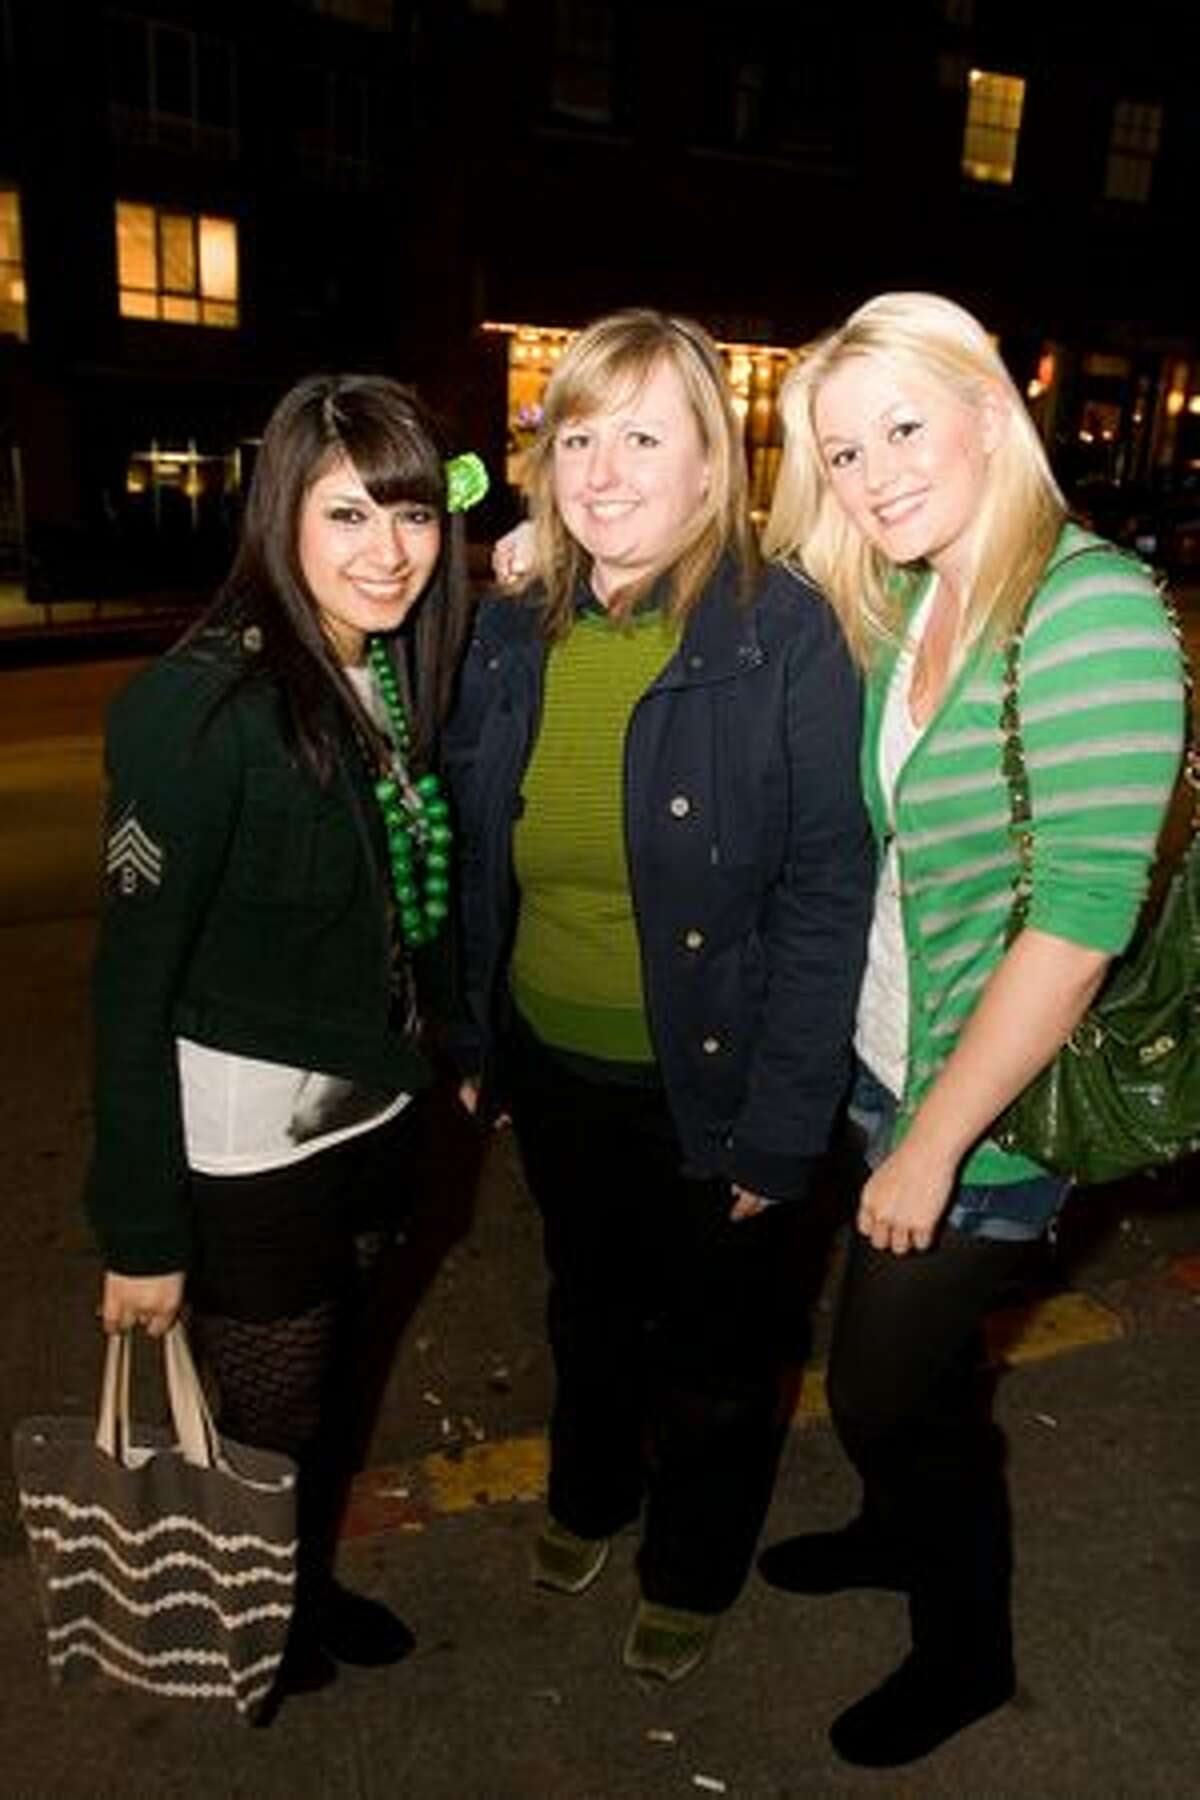 Patrons celebrate St. Patrick's Day at Clever Dunne's Irish pub in Capitol Hill.